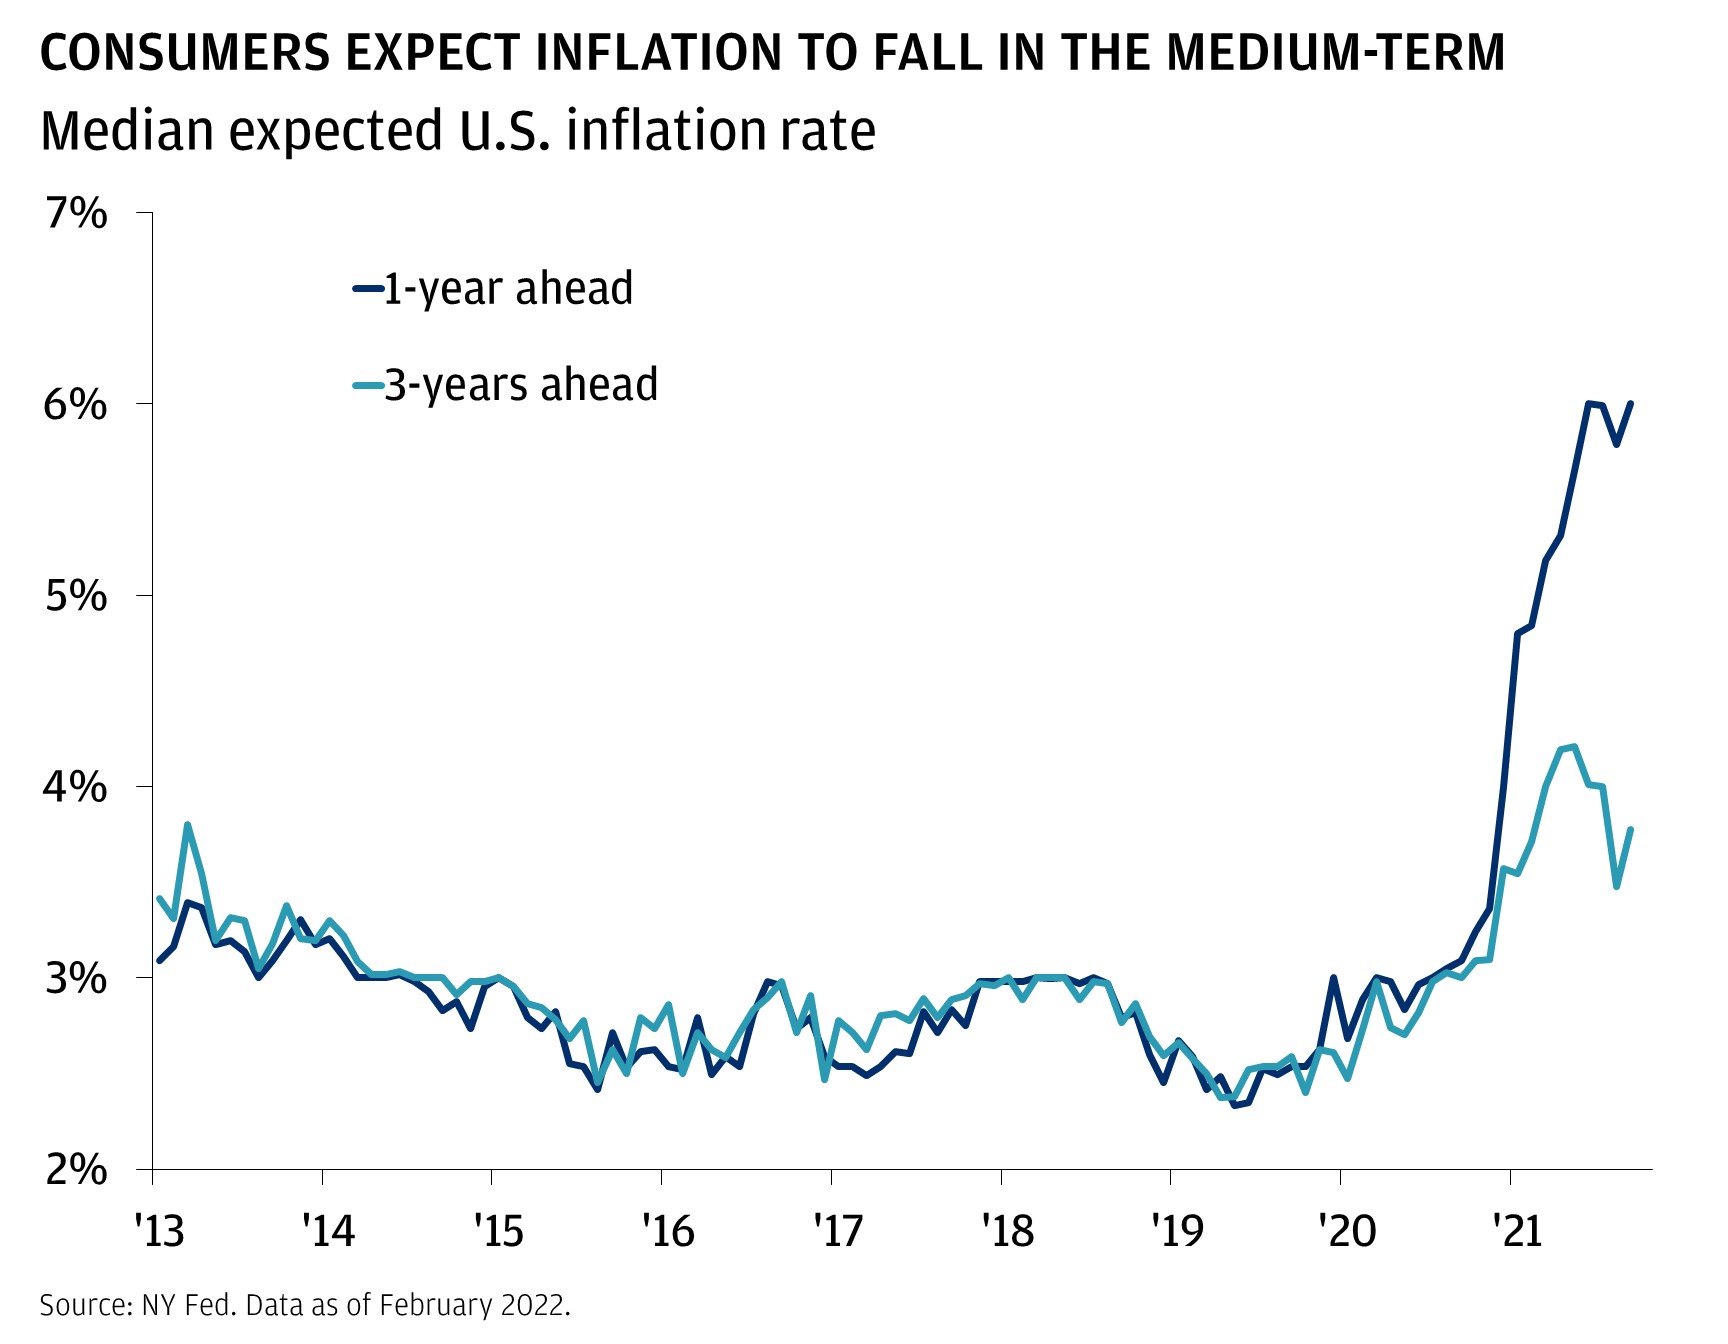 Consumers expect inflation to fall  in meridum term